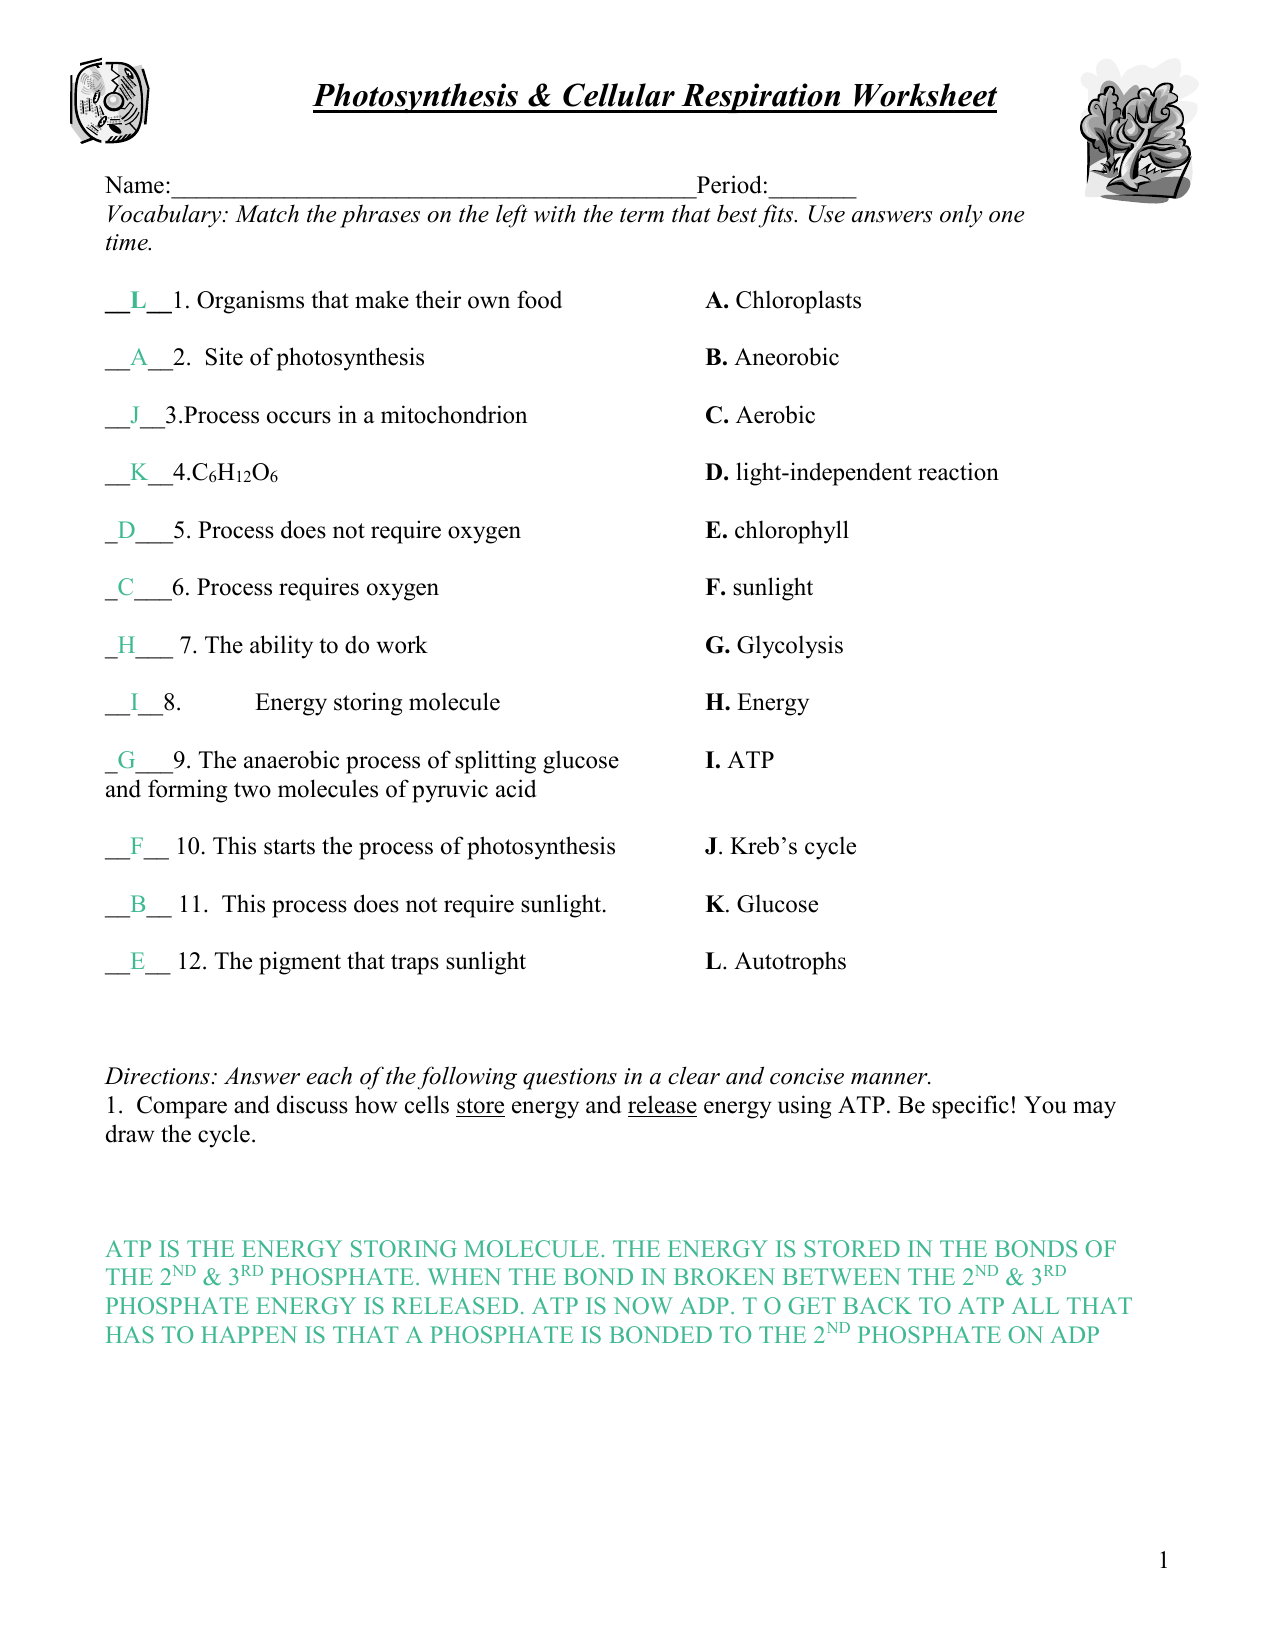 Key Photosynthesis respiration review worksheet In Cellular Respiration Review Worksheet